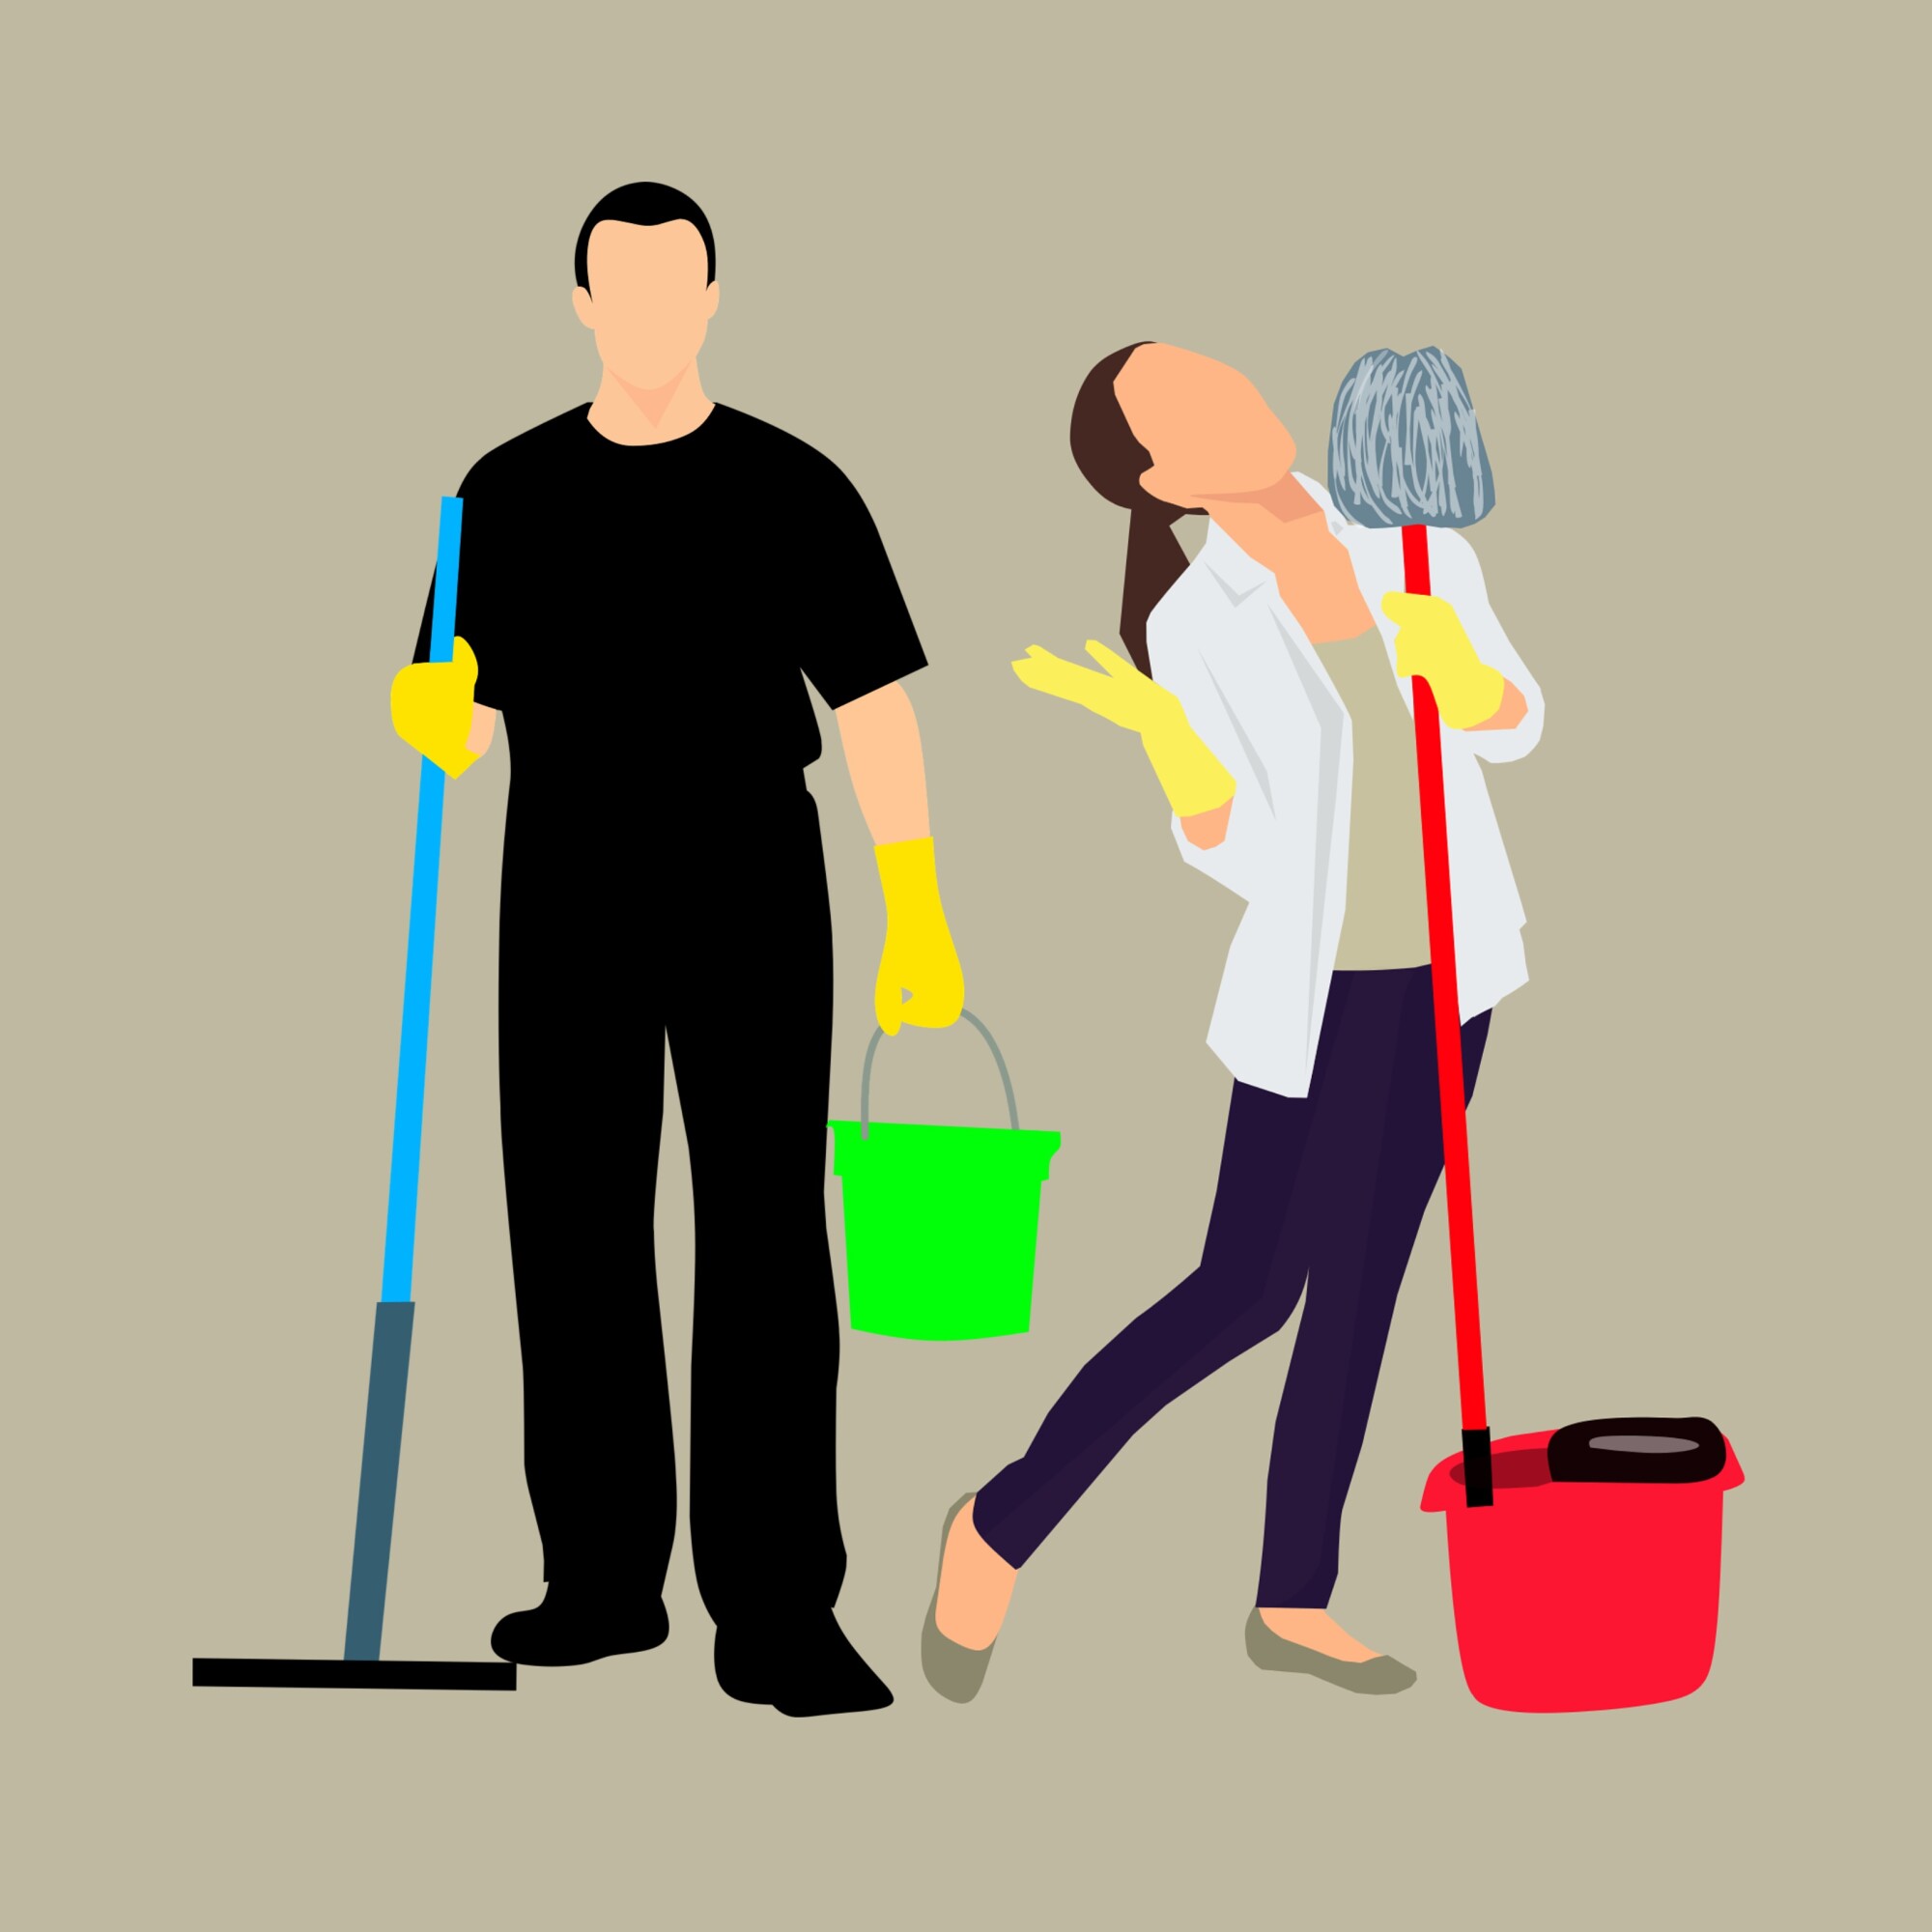 house cleaning service